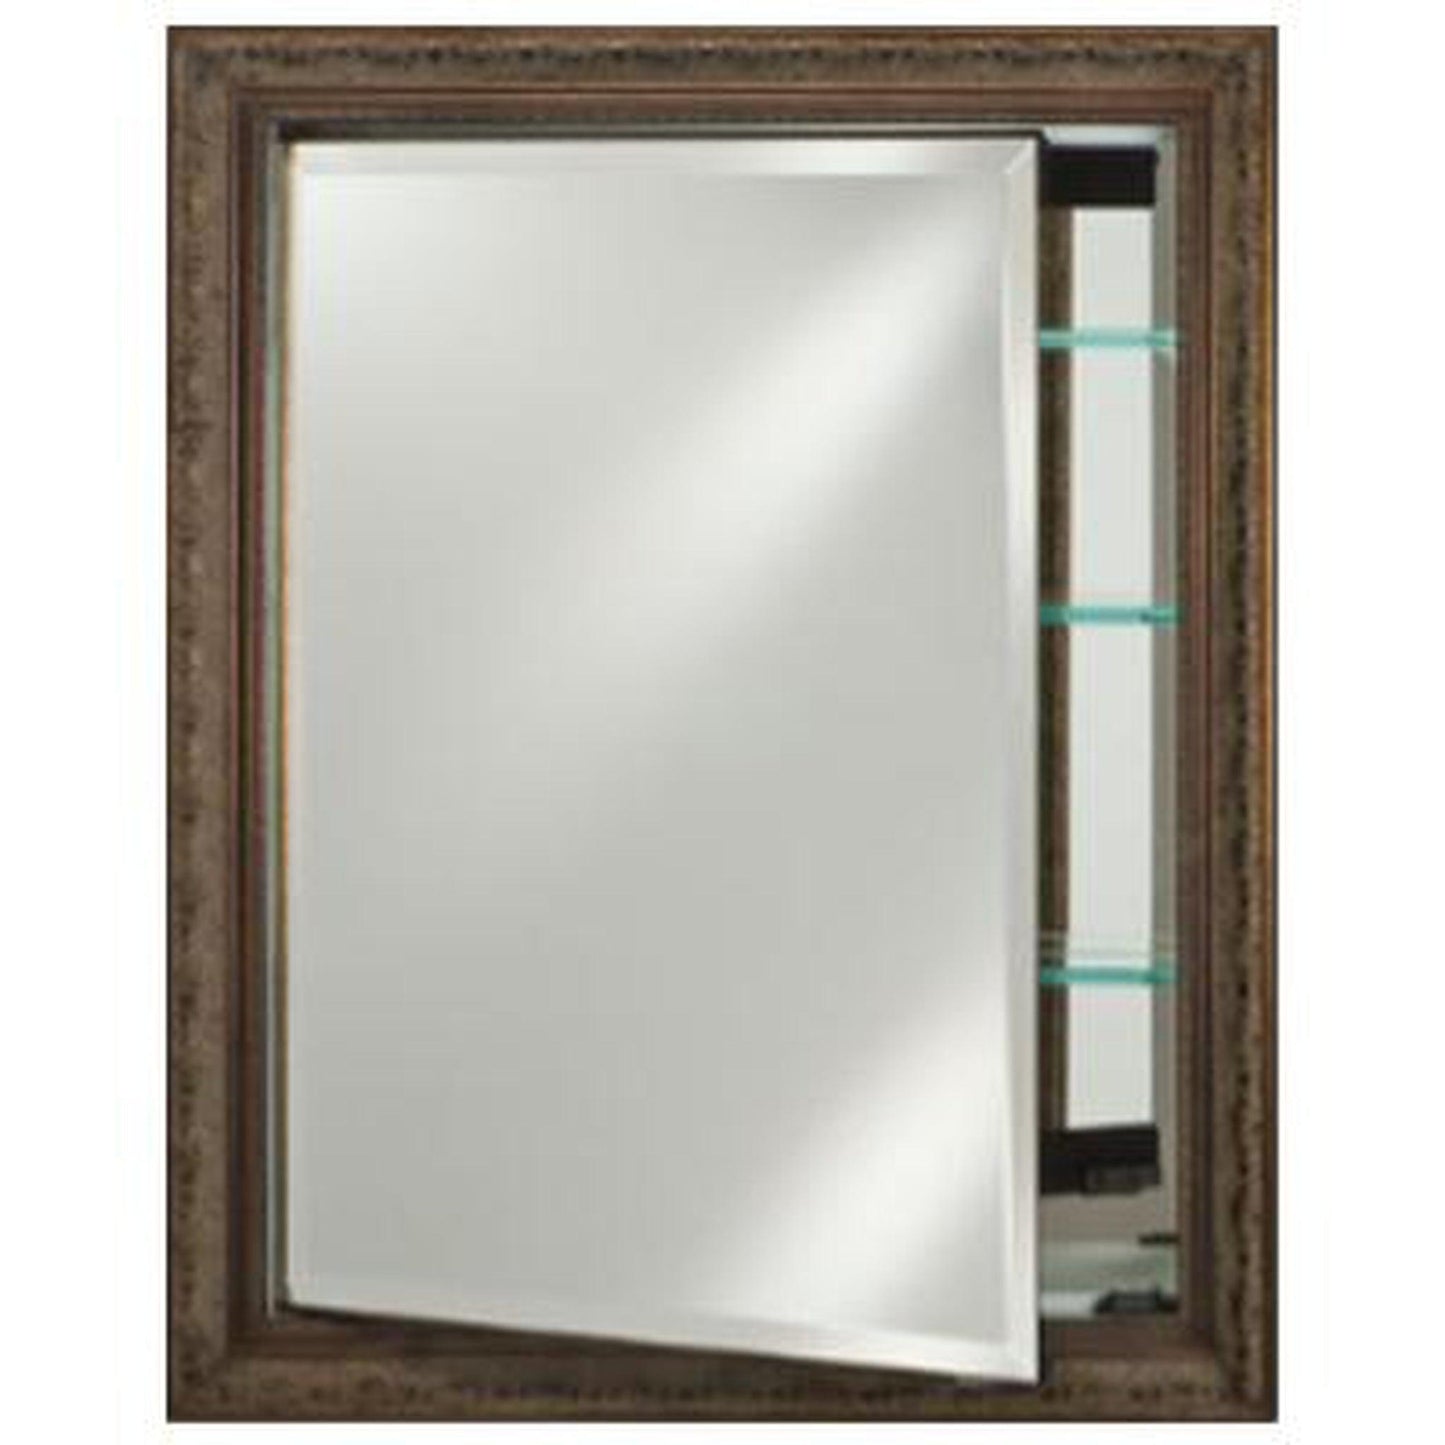 Afina Signature 17" x 26" Polished Glimmer-Scallop Recessed Reversible Hinged Single Door Medicine Cabinet With Beveled Edge Mirror